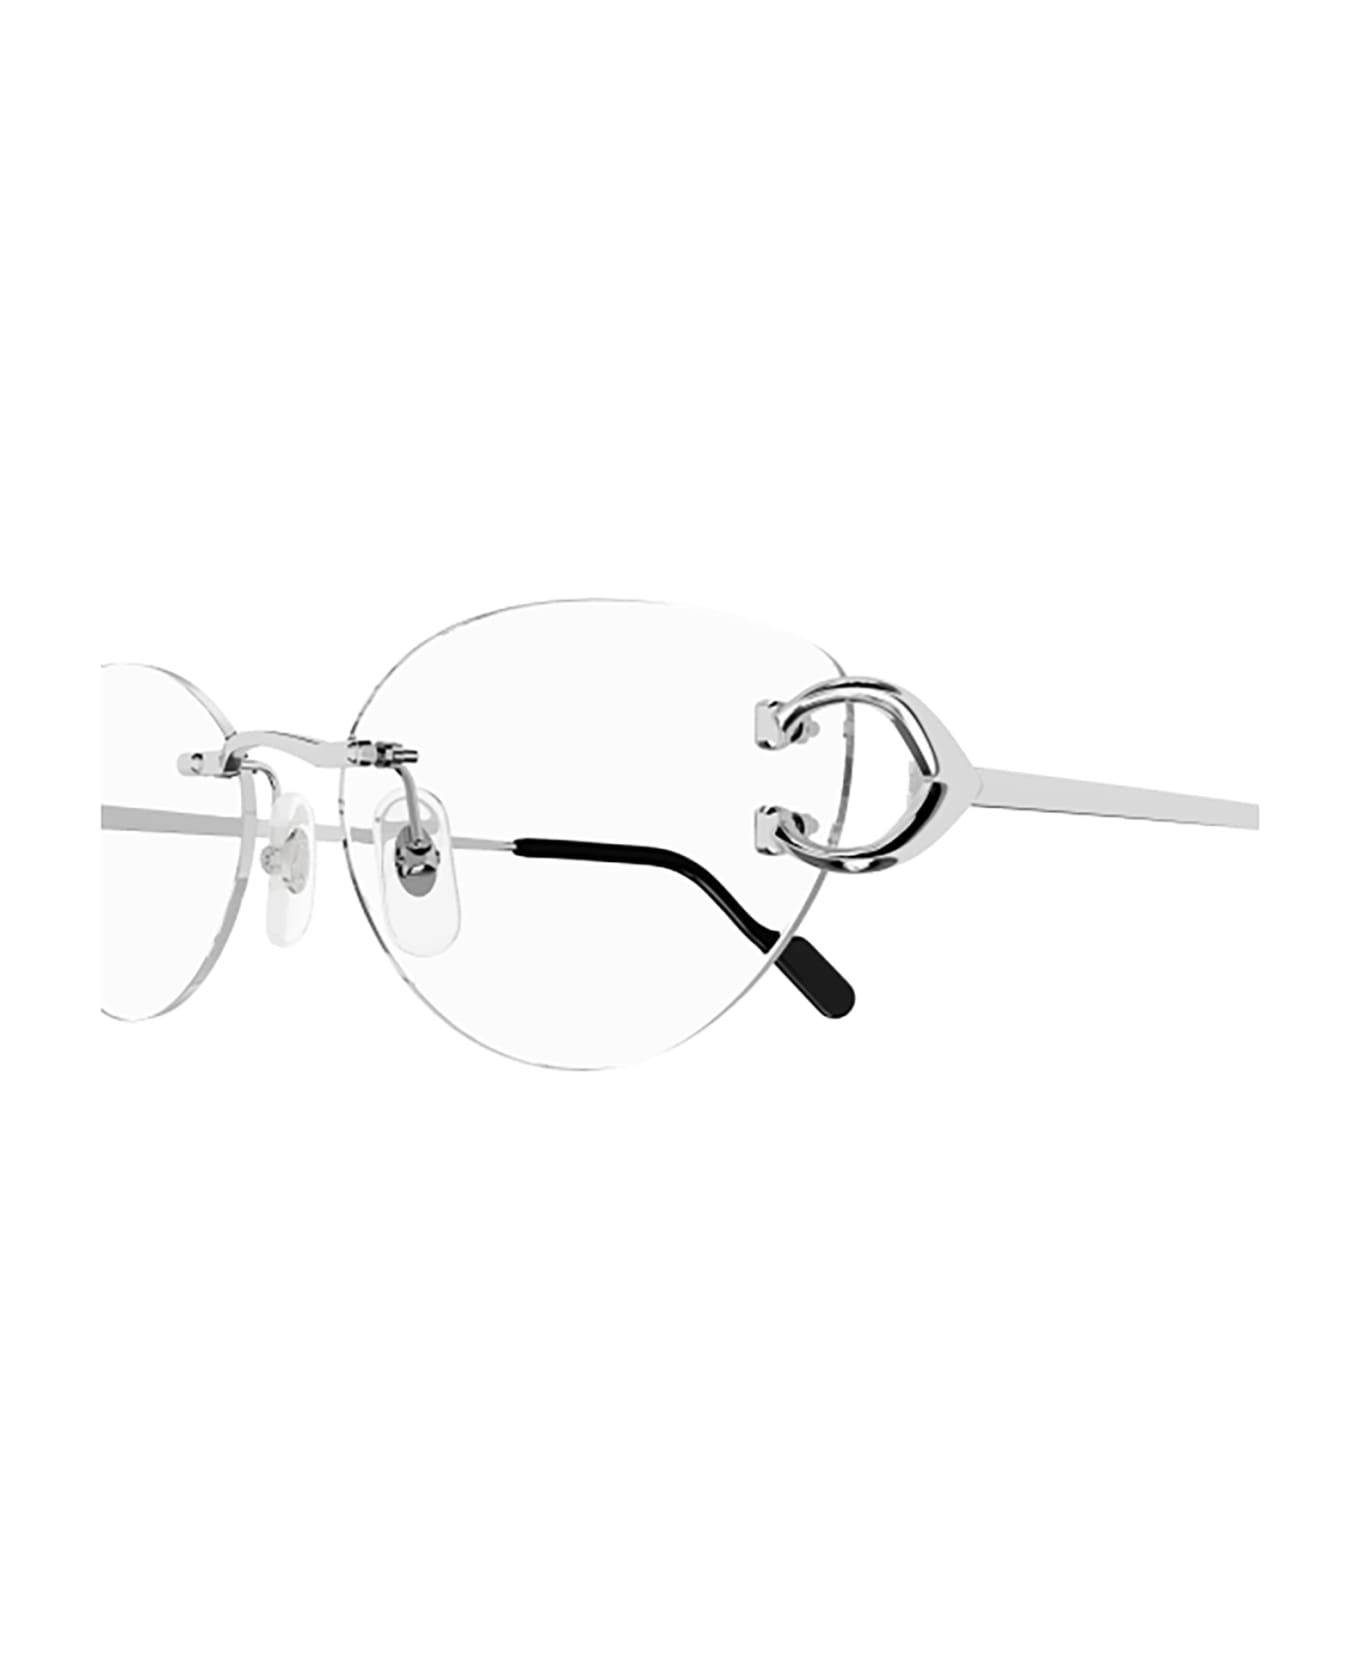 Cartier Eyewear Ct0487o Glasses - 002 SILVER SILVER TRANSPARENT アイウェア